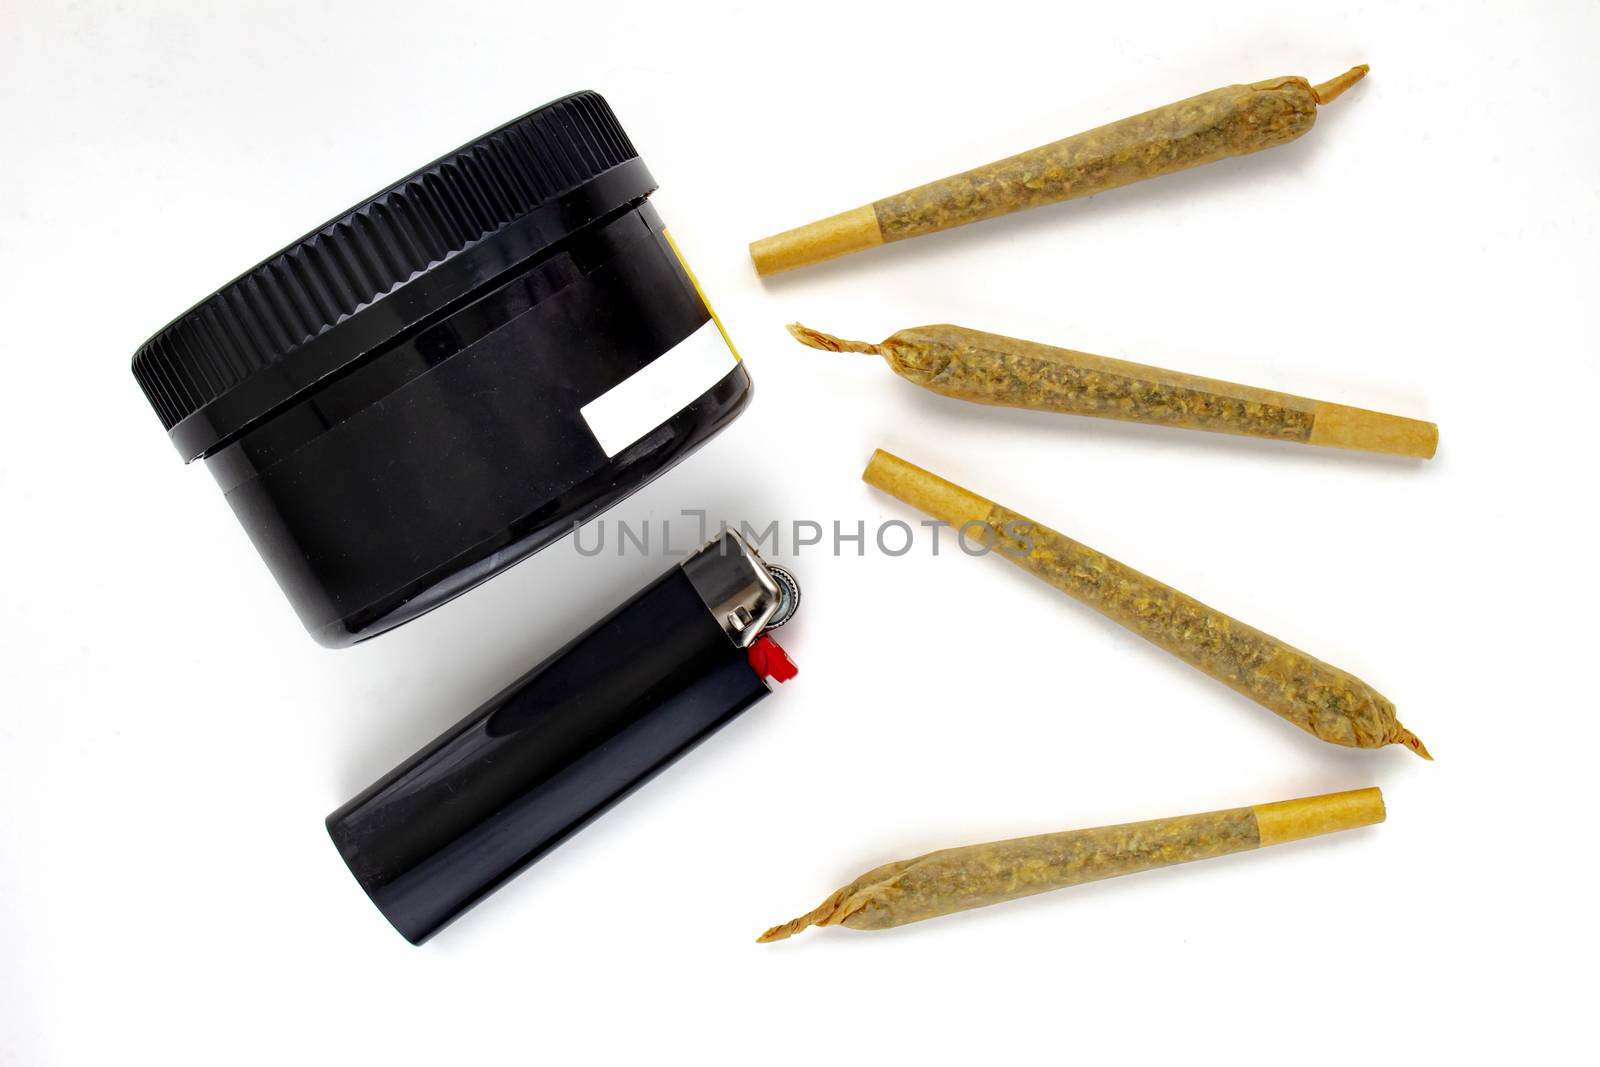 A Cannabis black plastic packaging container with Cigarettes, Prerolls or Joints and a lighter on a white background by oasisamuel